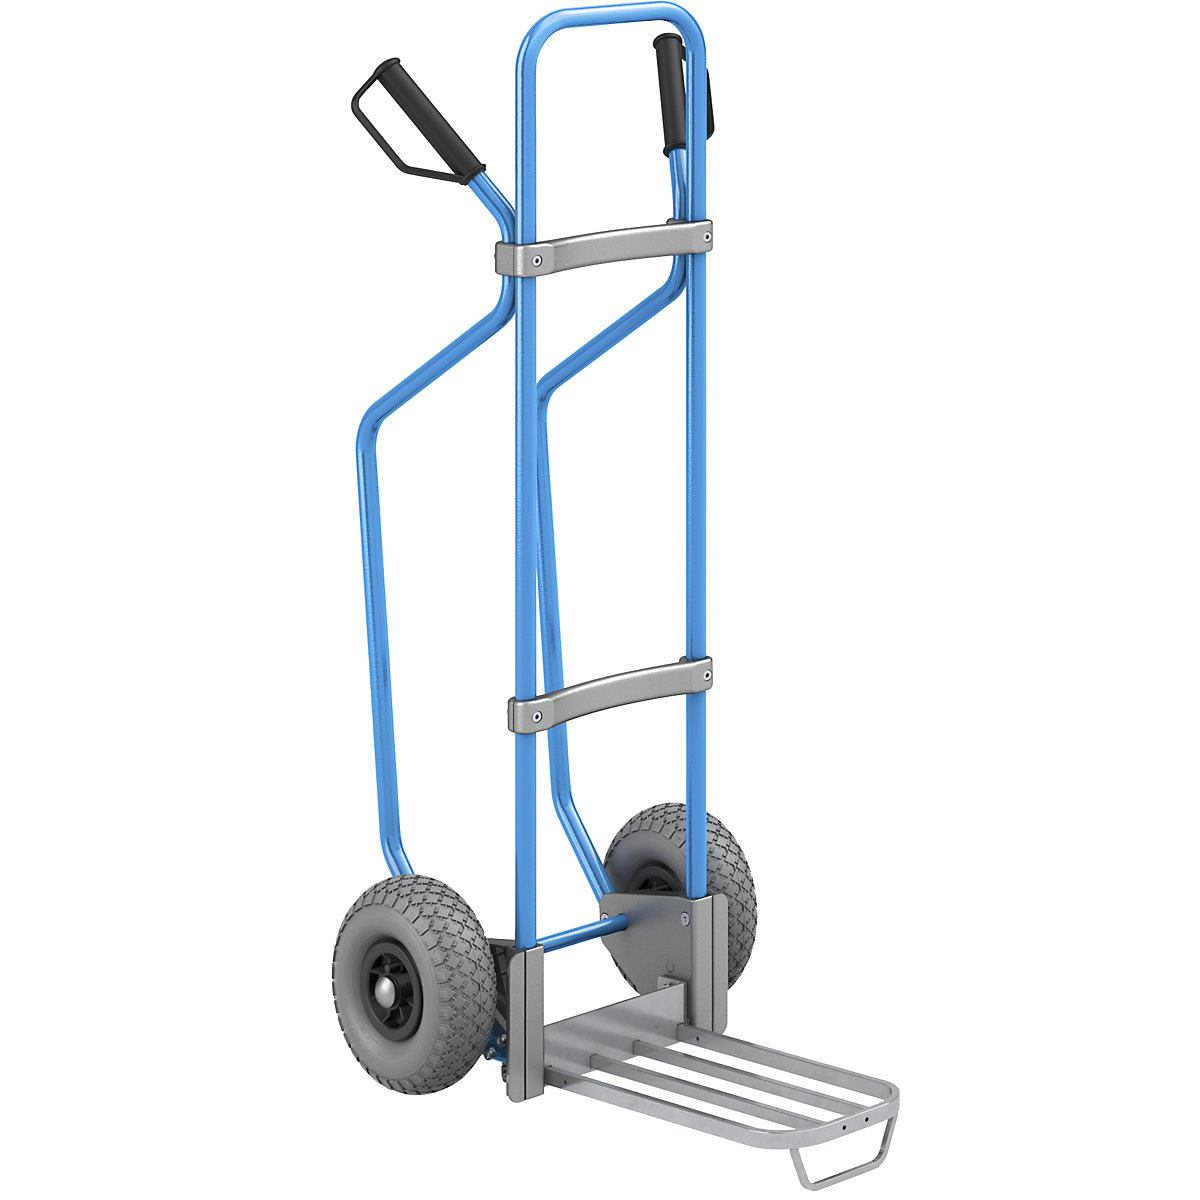 Sack truck with runners, blue – eurokraft pro, parcel footplate WxD 430 x 250 mm, zinc plated, with handle, PU tyres, 5+ items-3